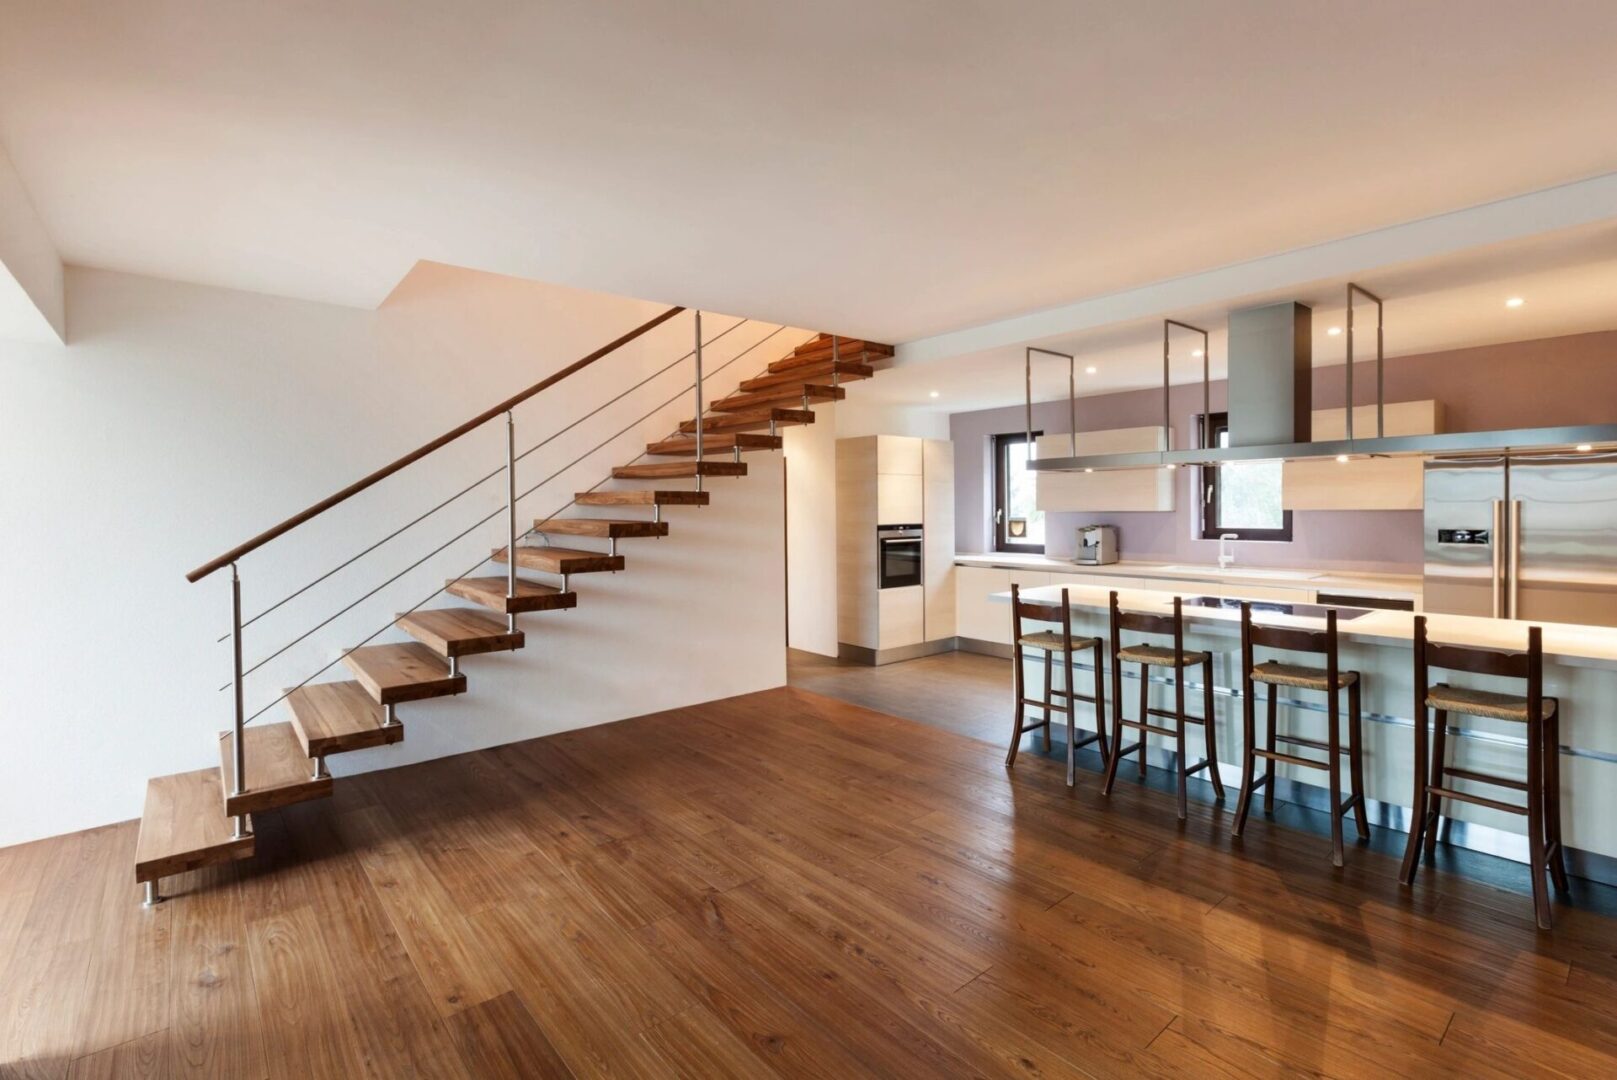 A room with wooden floors and stairs leading to the top floor.